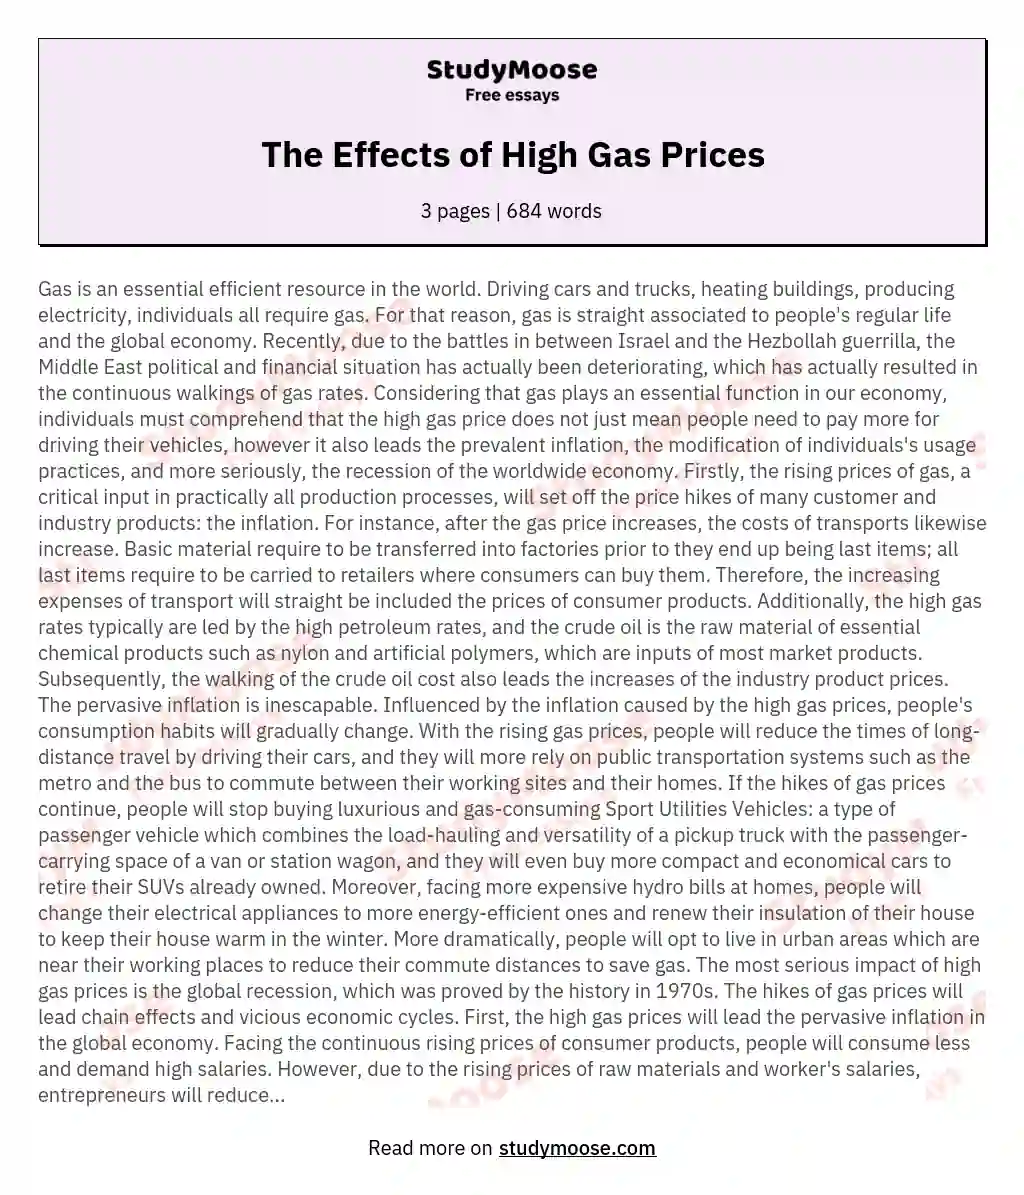 The Effects of High Gas Prices